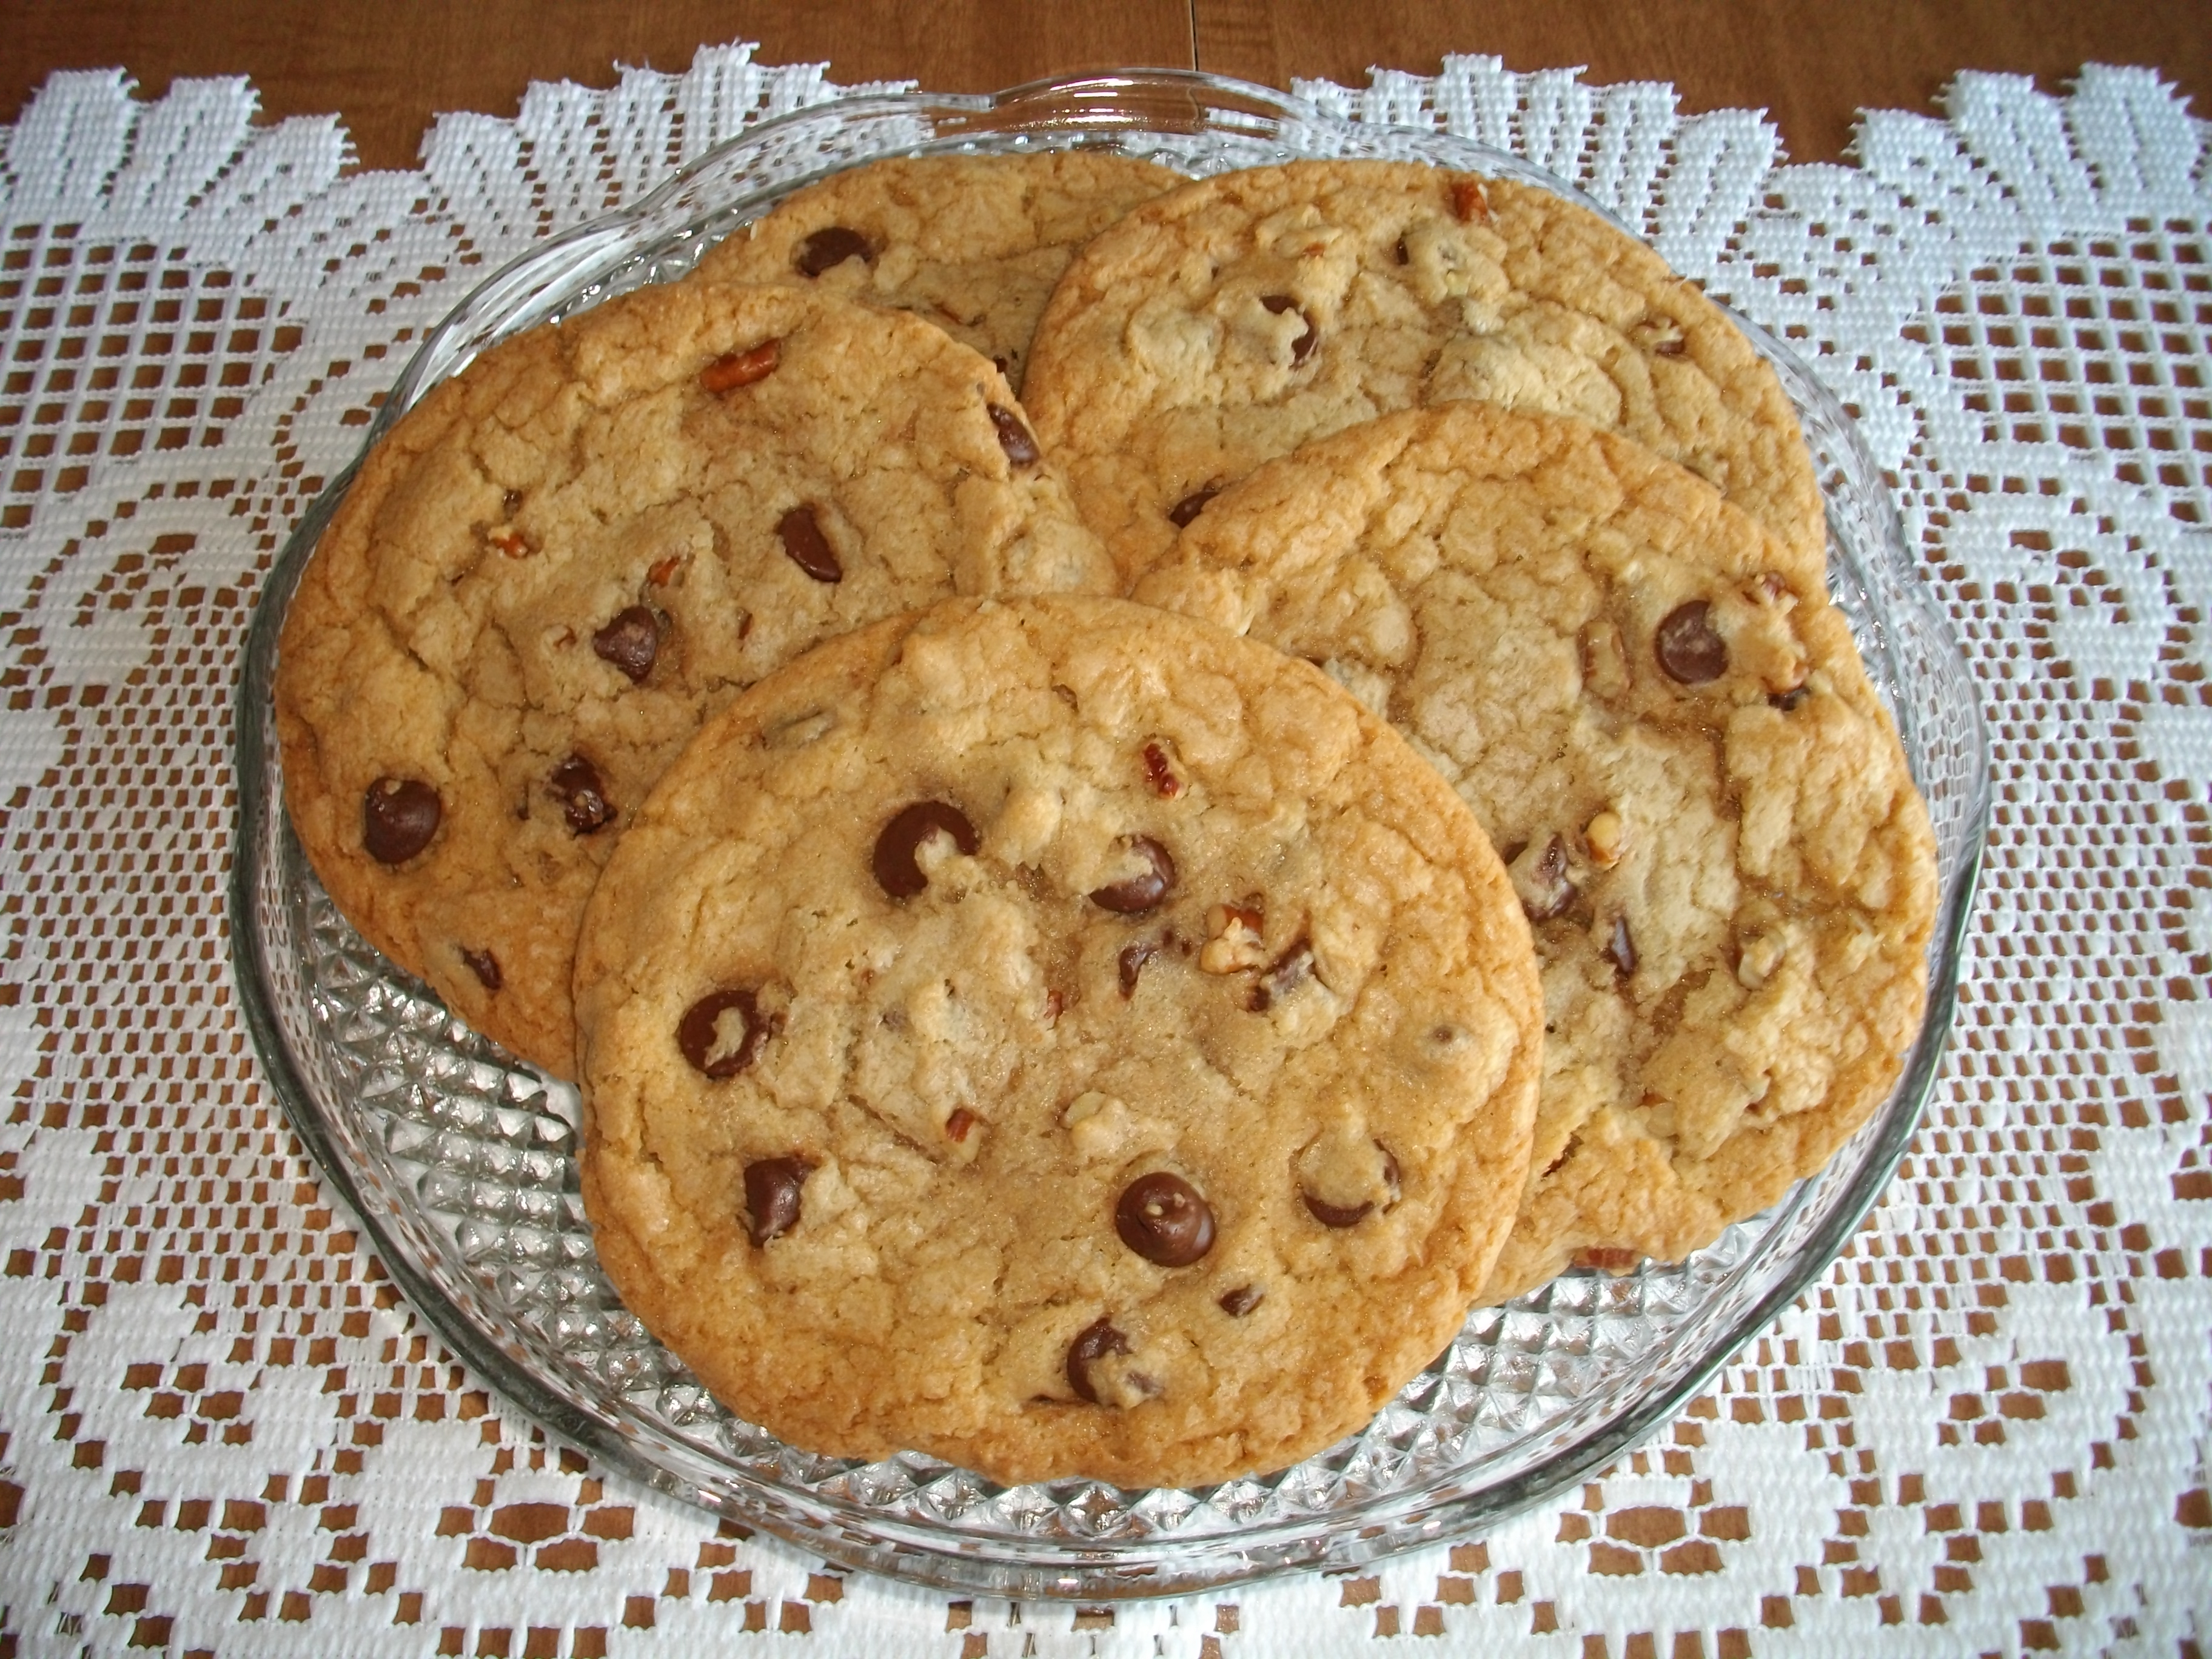 KITTENCAL'S JUMBO CHEWY BAKERY-STYLE CHOCOLATE CHIP COOKIES